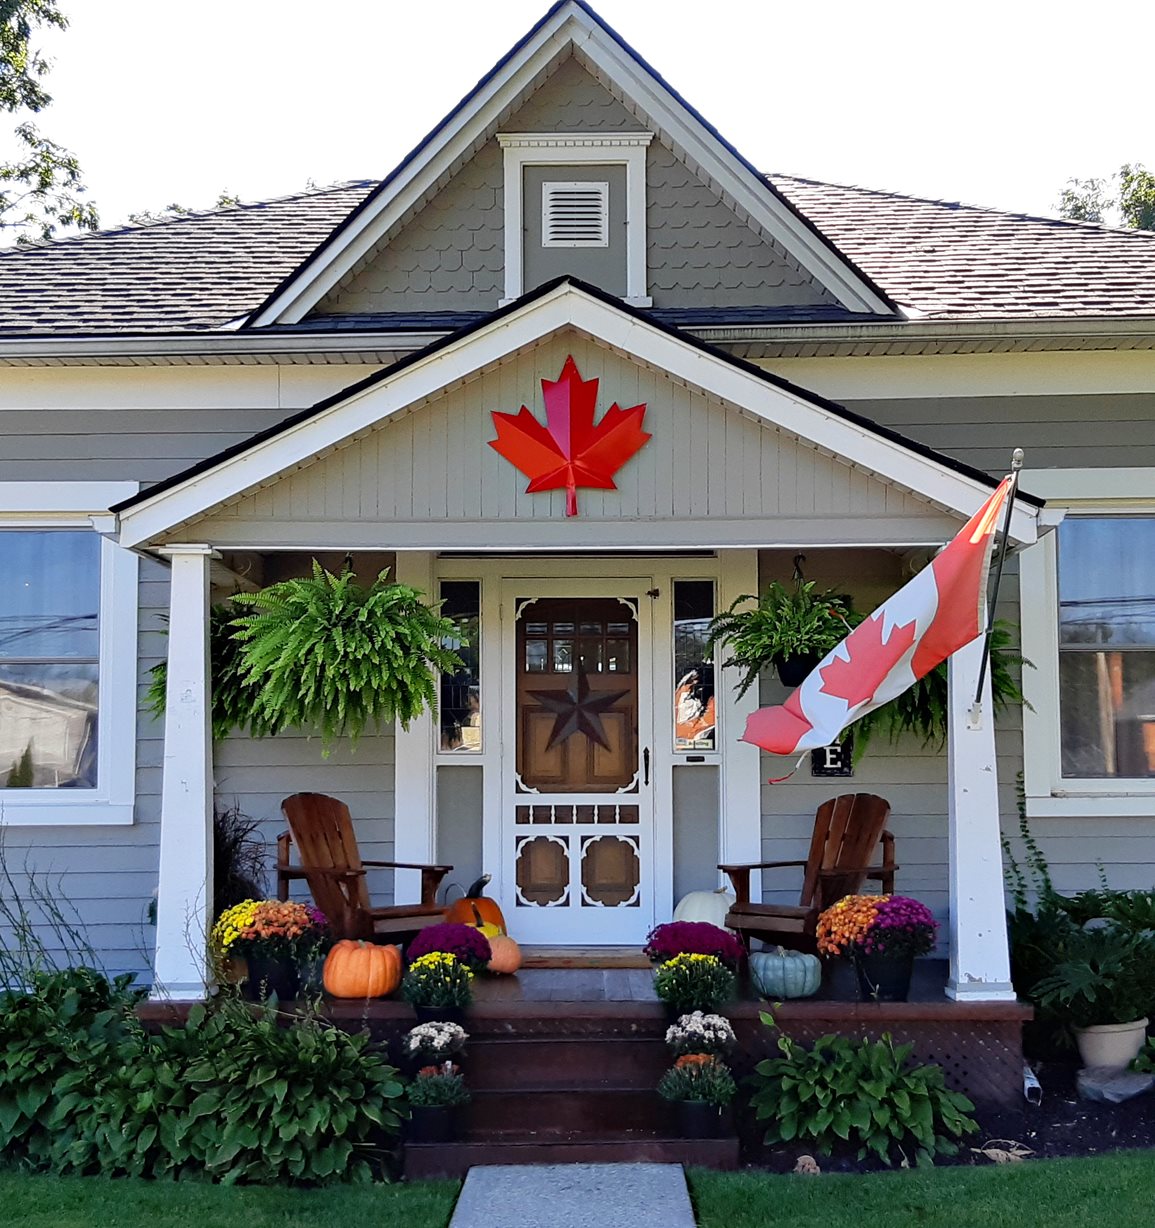 The front porch of a suburban home in Canada with fall decorations